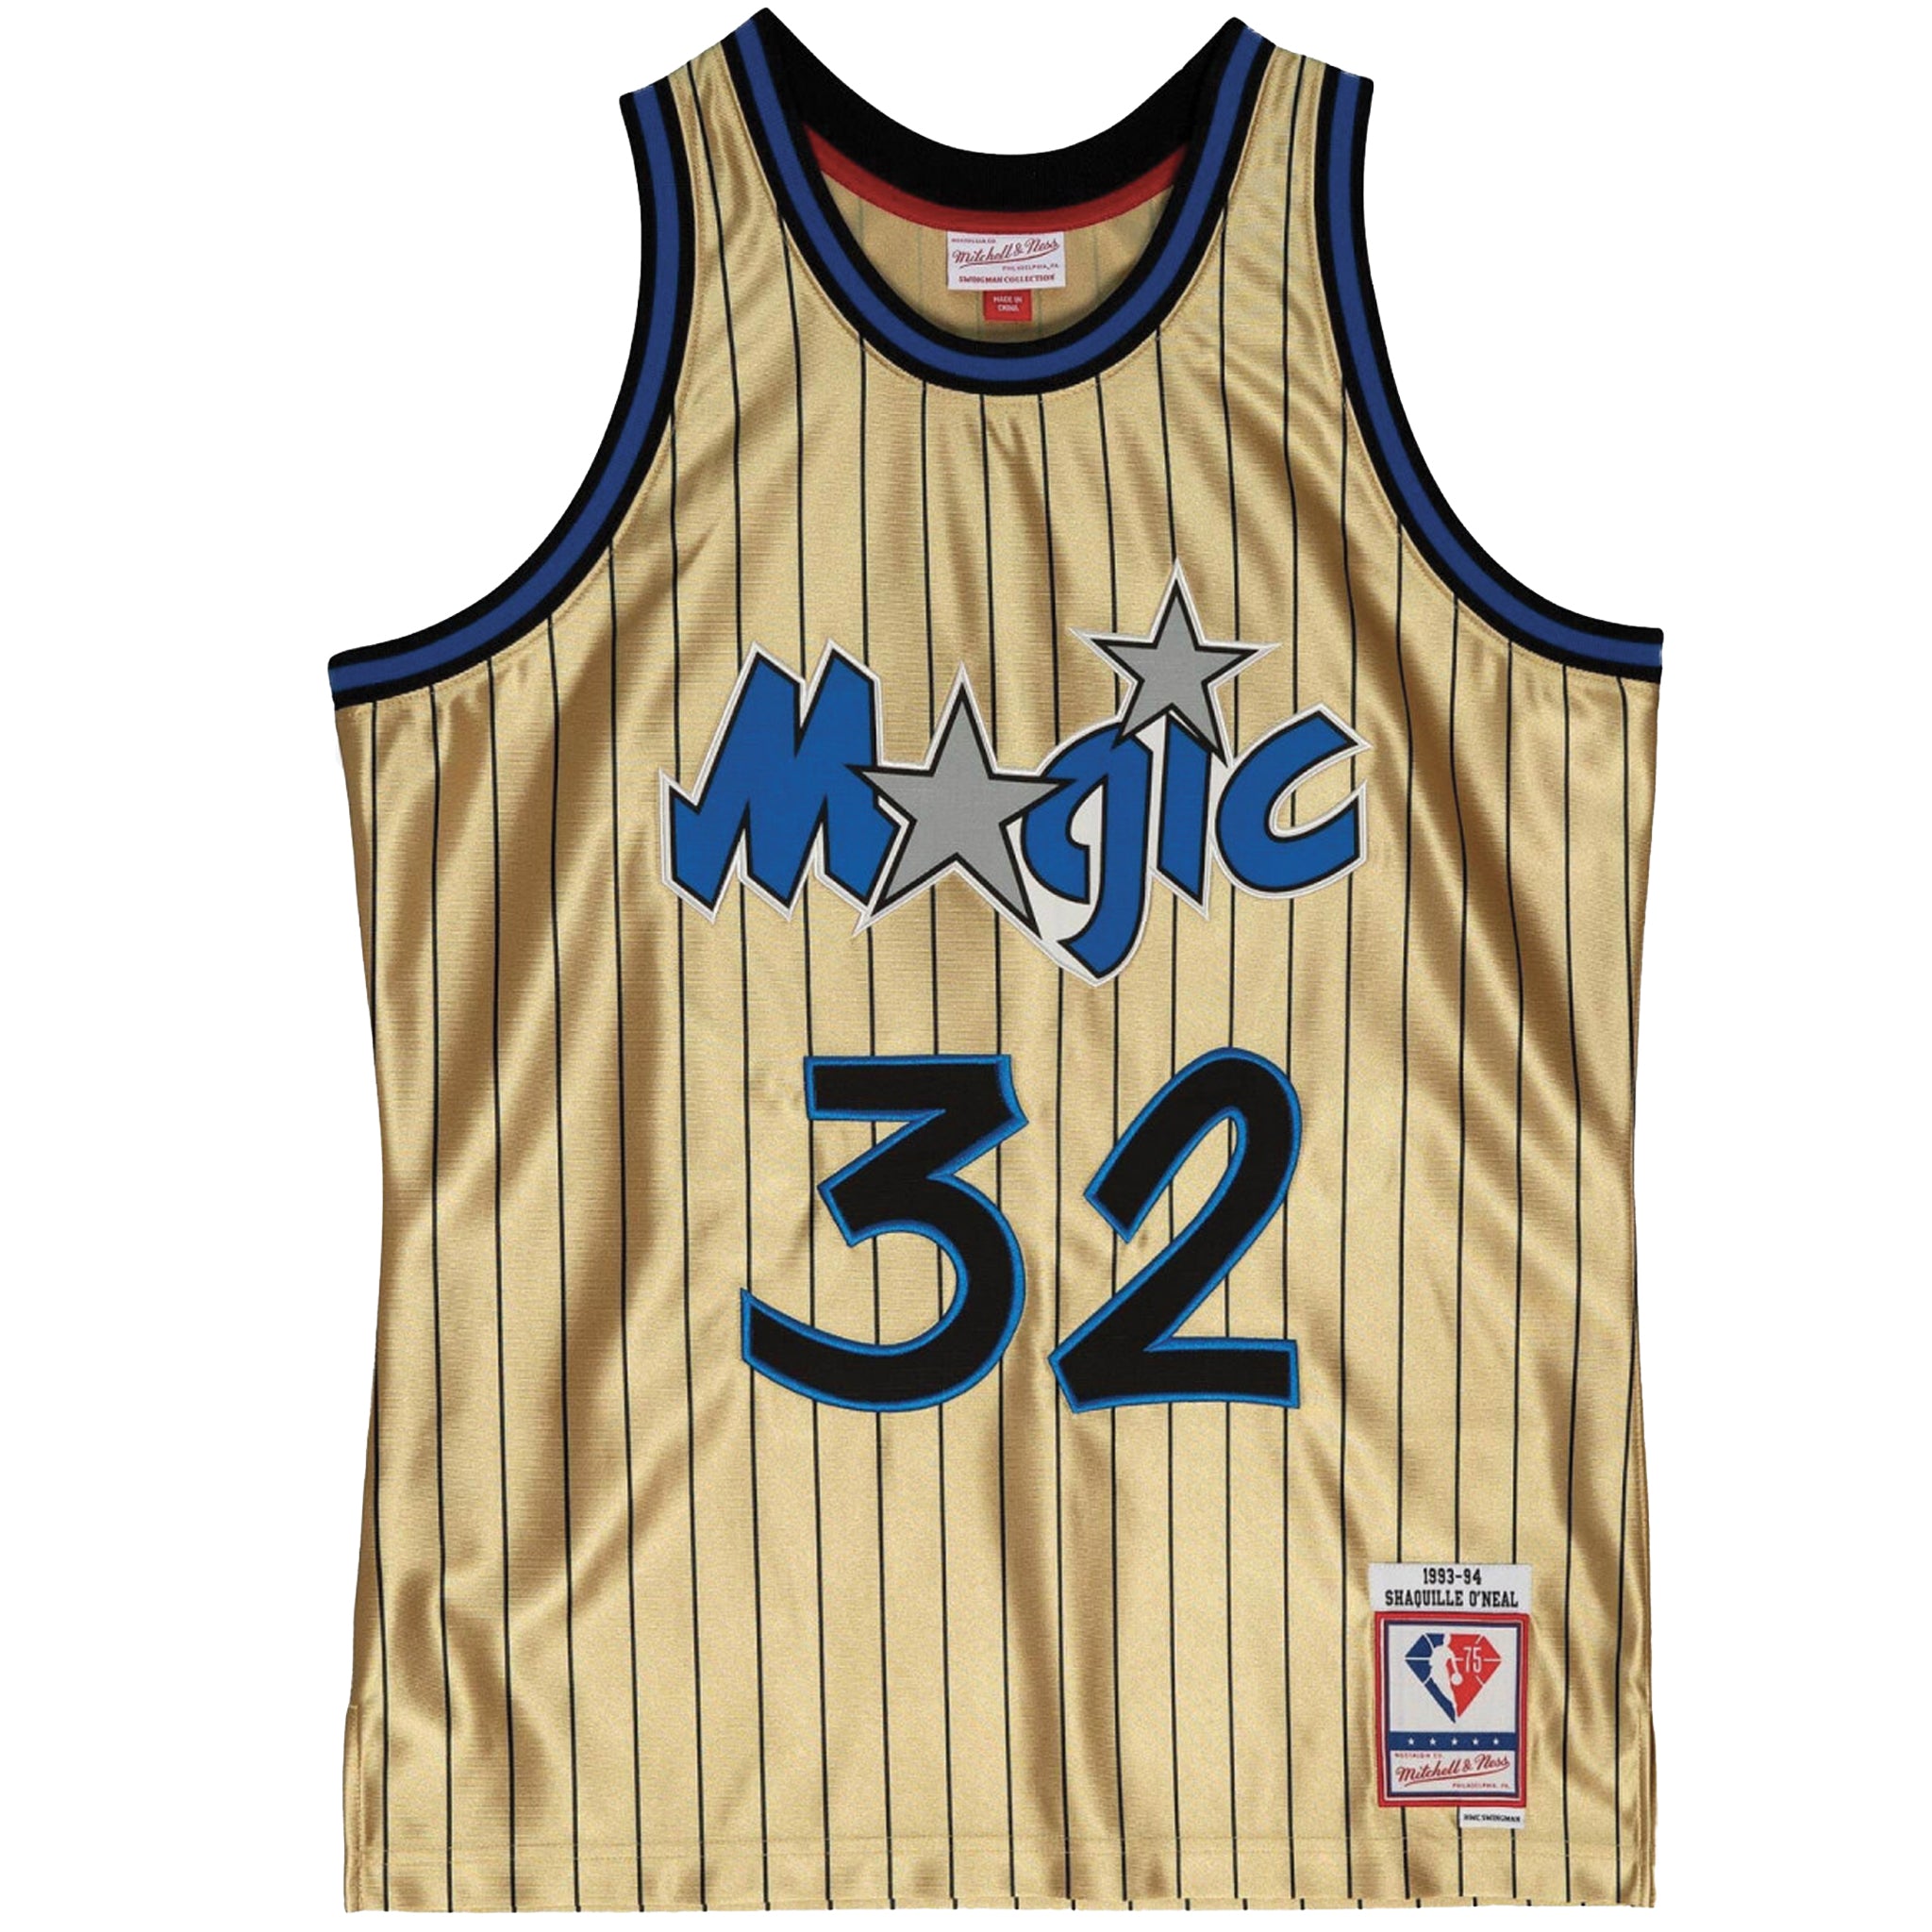 Mitchell & Ness Men's 75th Anniversary Gold Swingman Shaquille O'Neal –  That Shoe Store and More